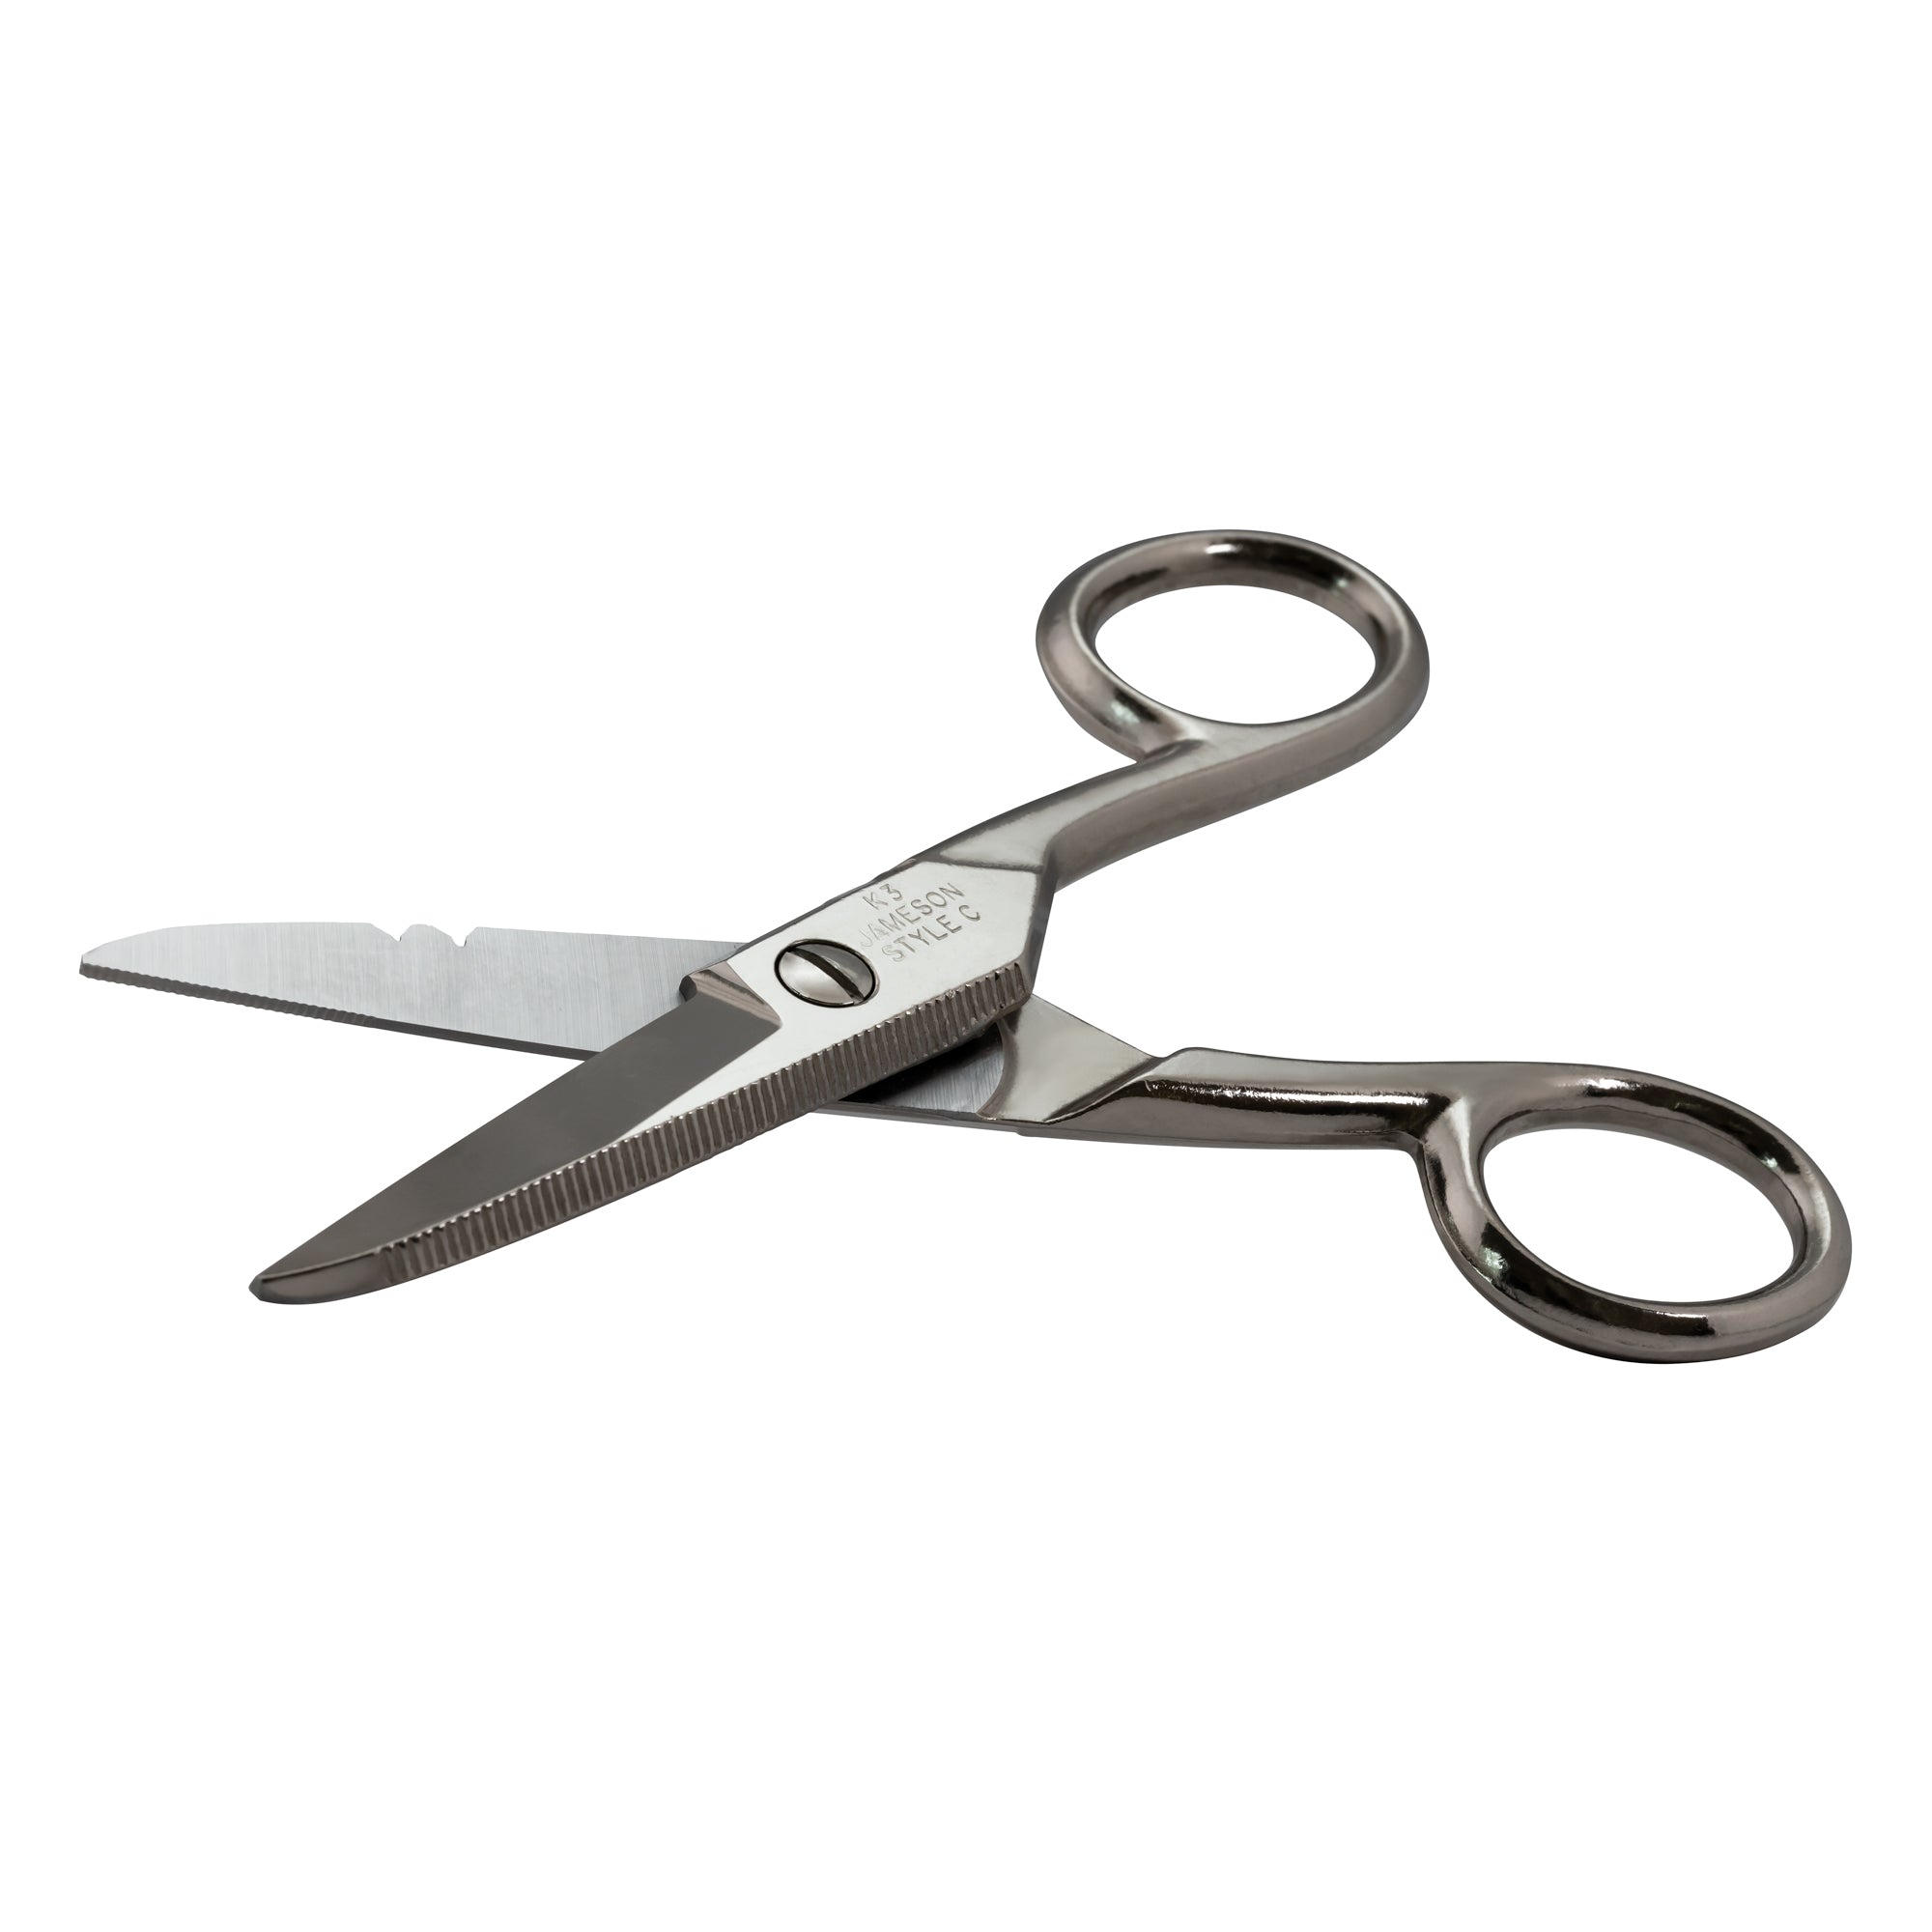 Electrician Scissors: Cut to the Chase